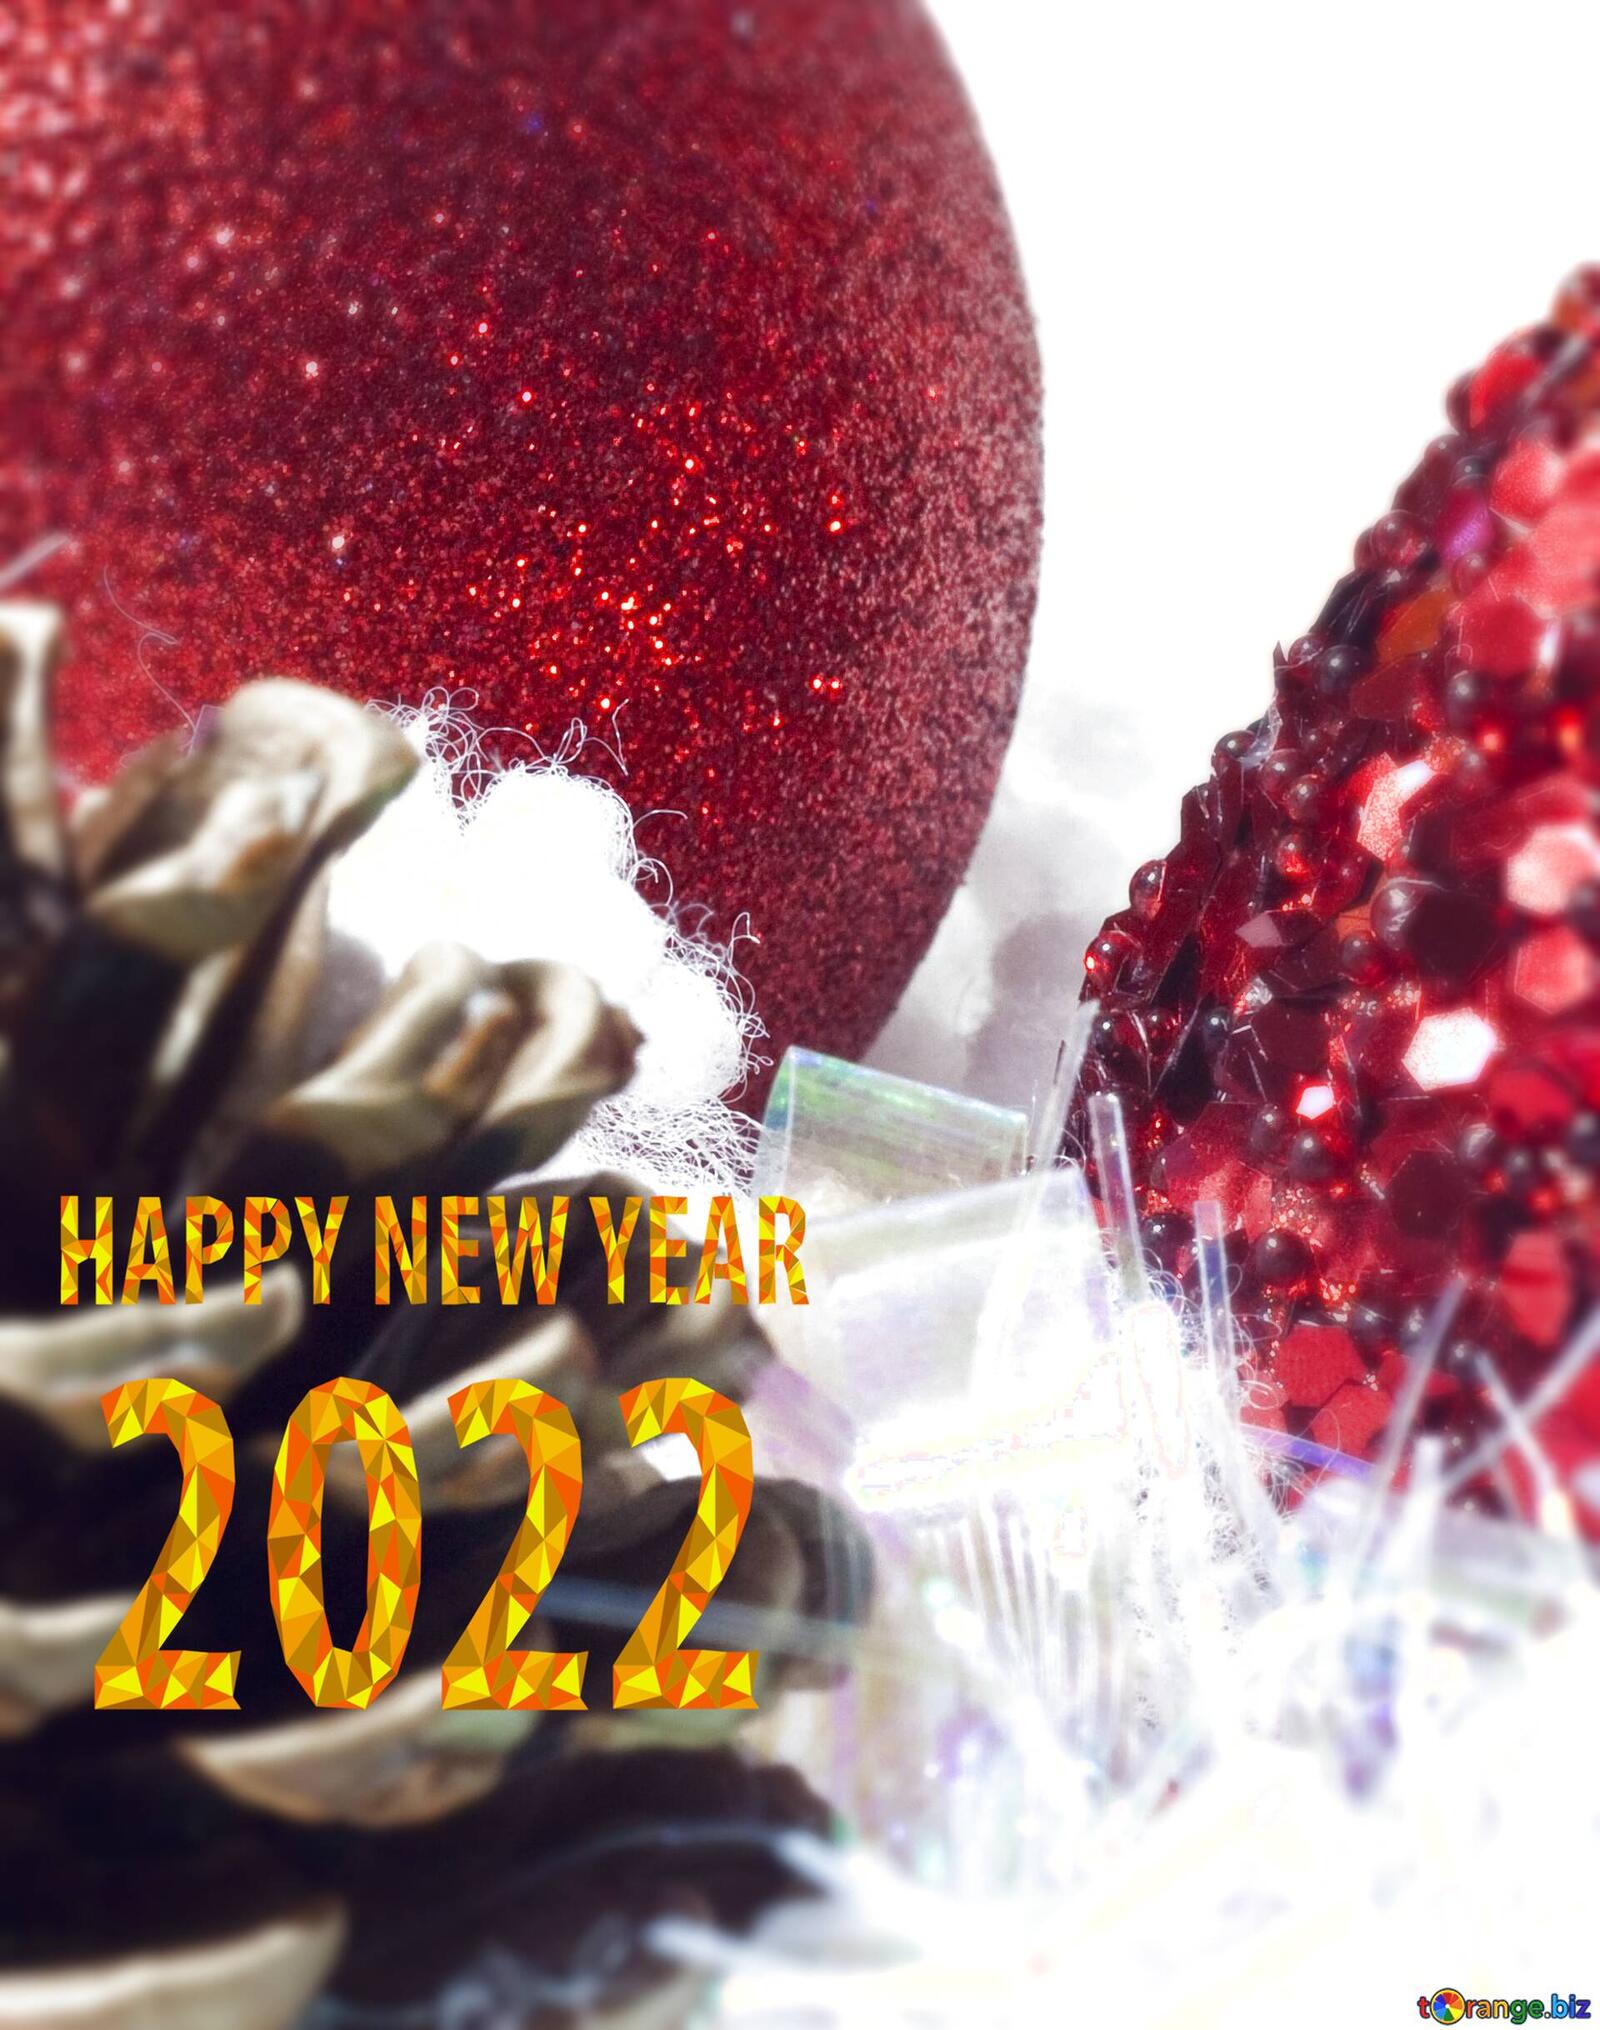 Wallpapers with 2022 new year 2022 on the desktop